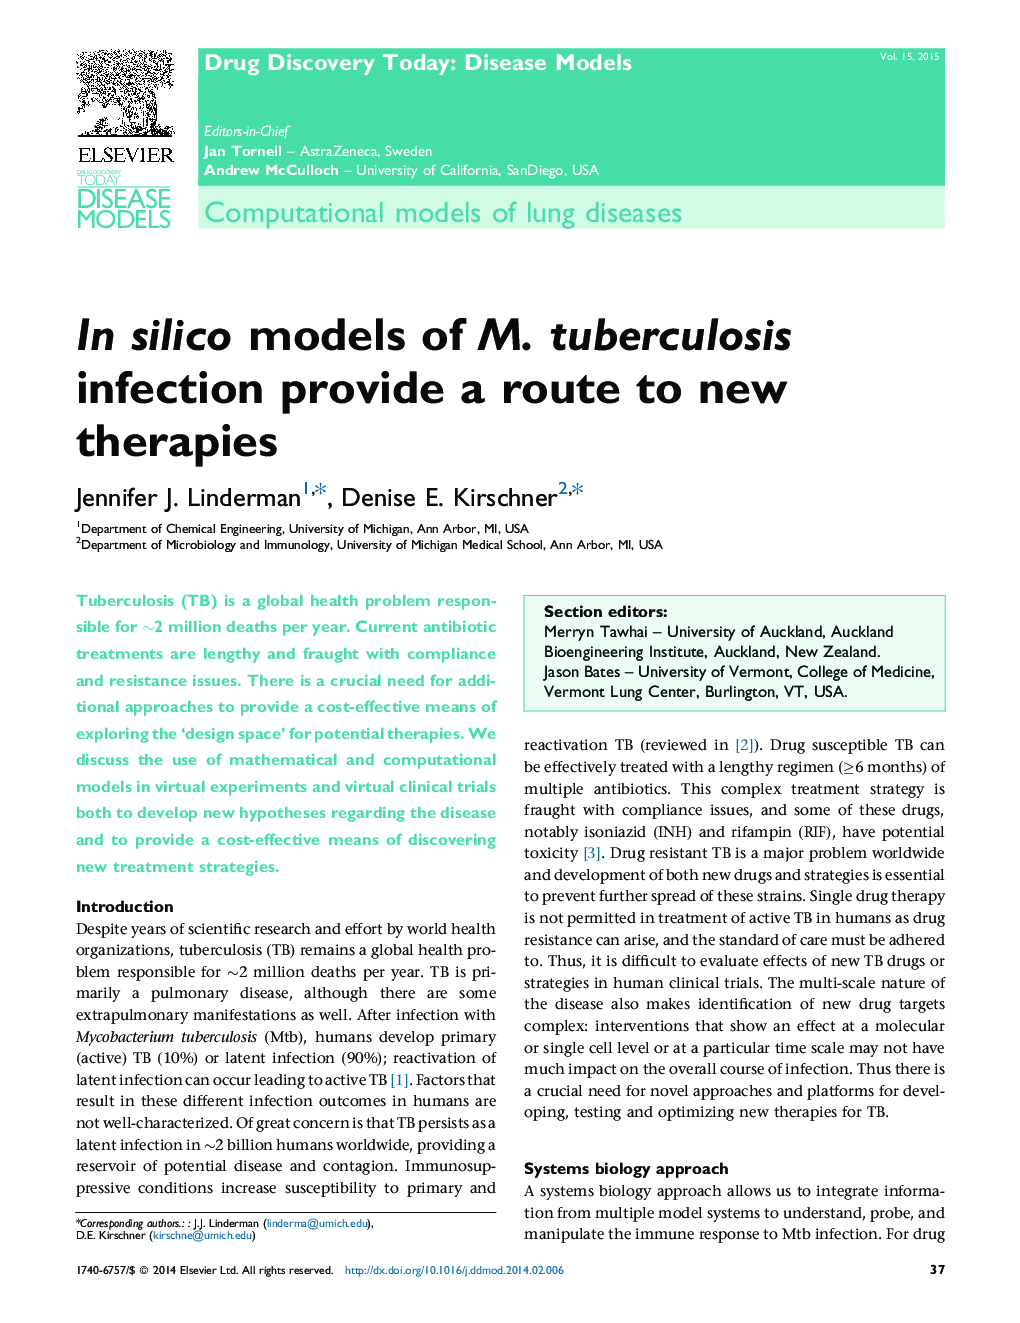 In silico models of M. tuberculosis infection provide a route to new therapies